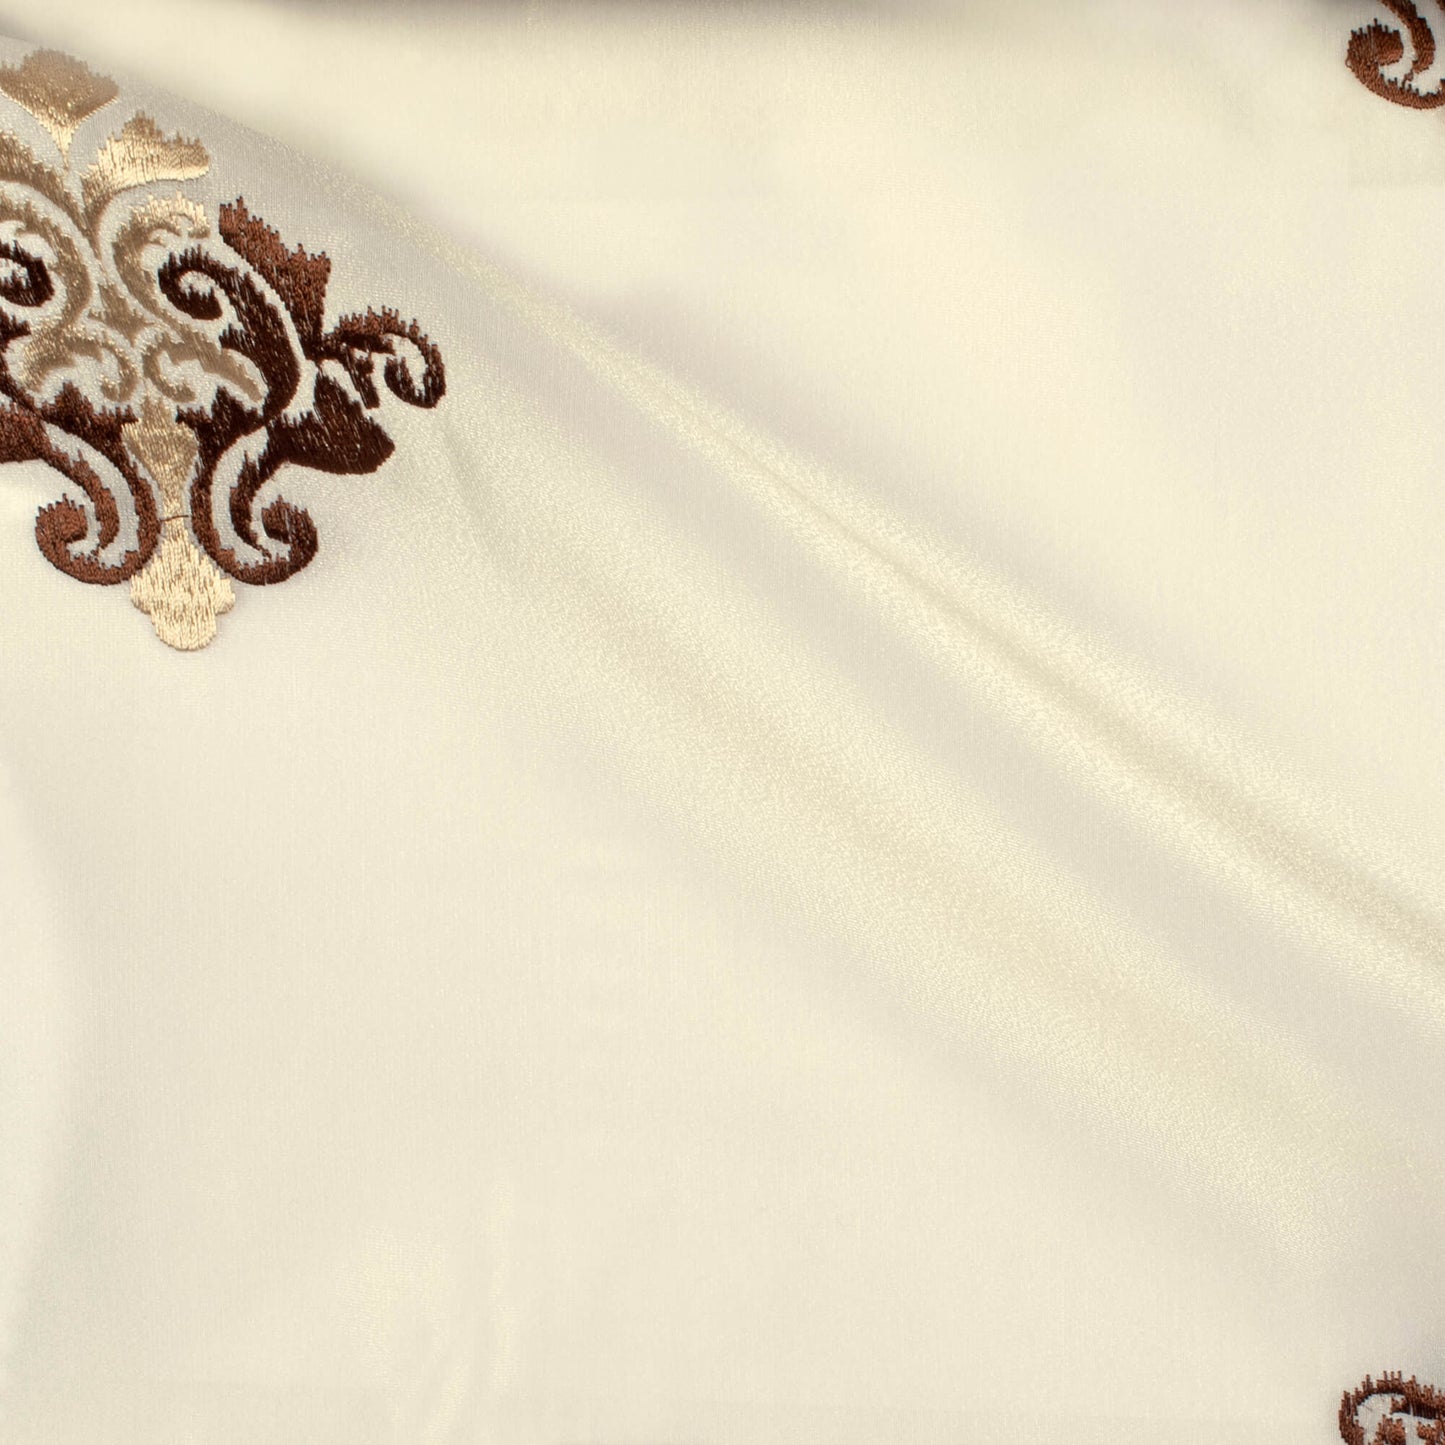 Oatmeal Beige And Coffee Brown Ethnic Pattern Embroidery Organza Tissue Premium Sheer Fabric (Width 48 Inches)